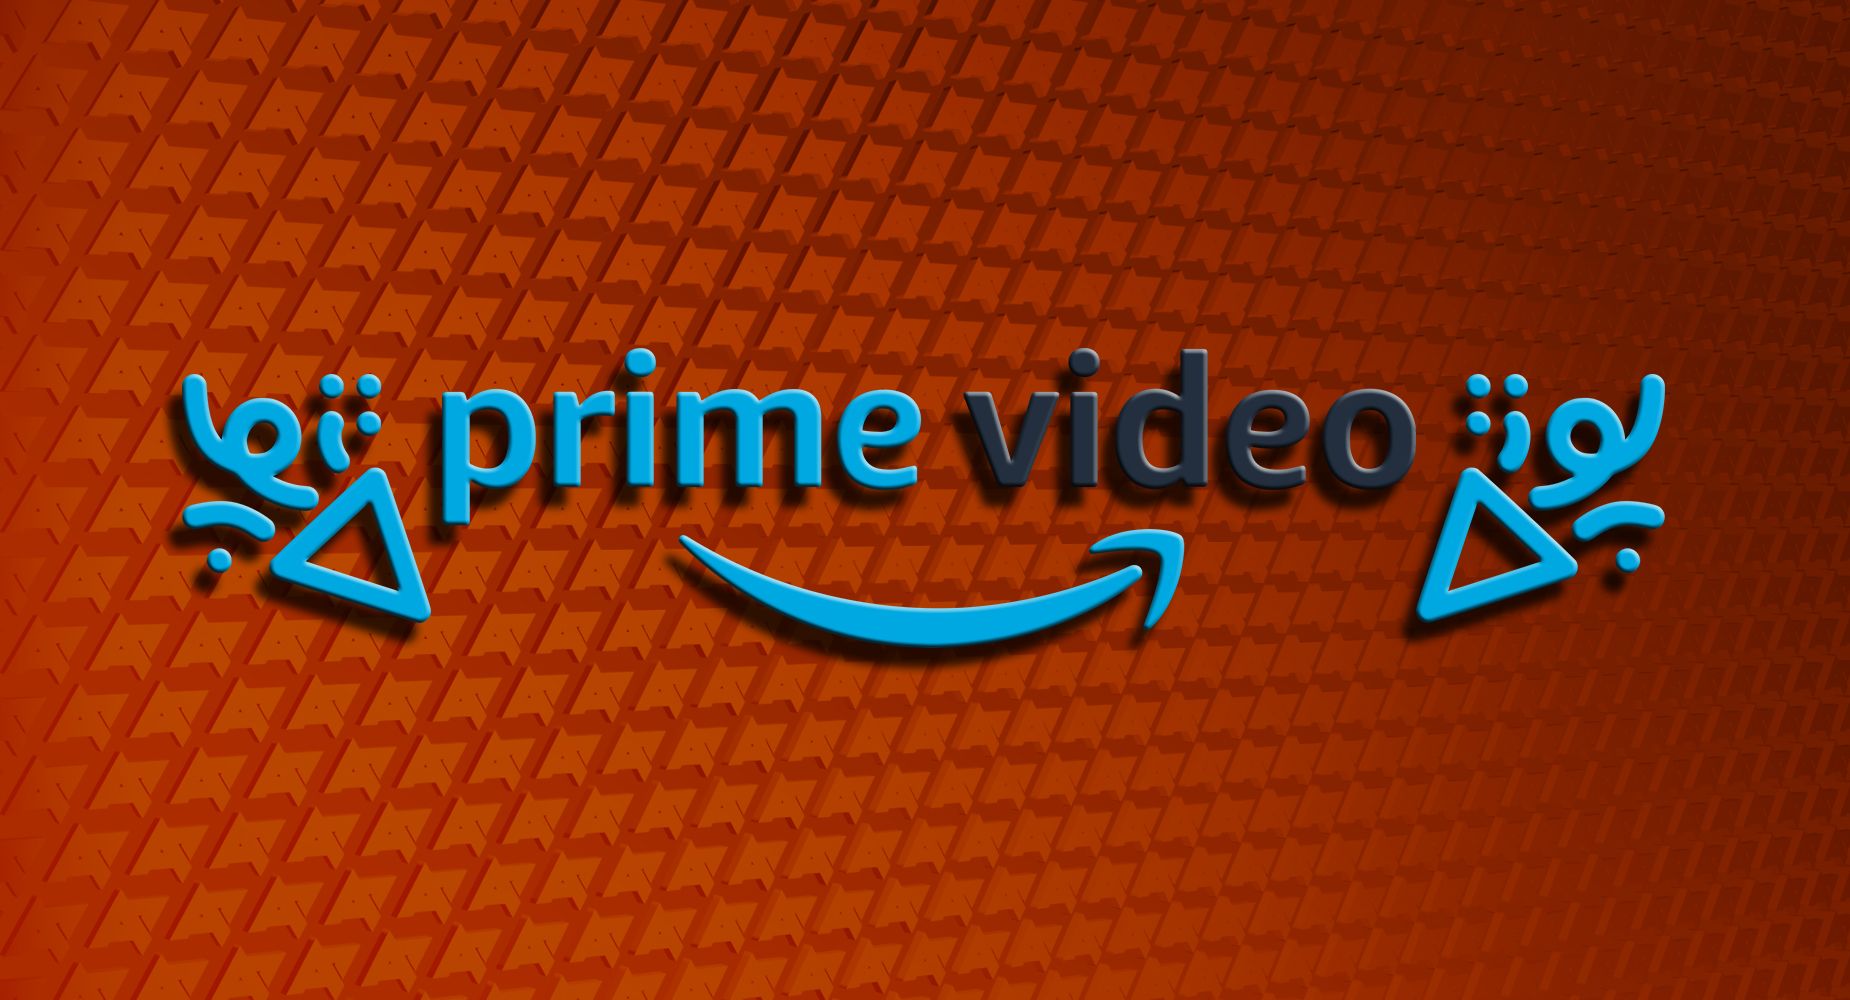 Amazon Prime Video Watch Party: What it is and how to use it